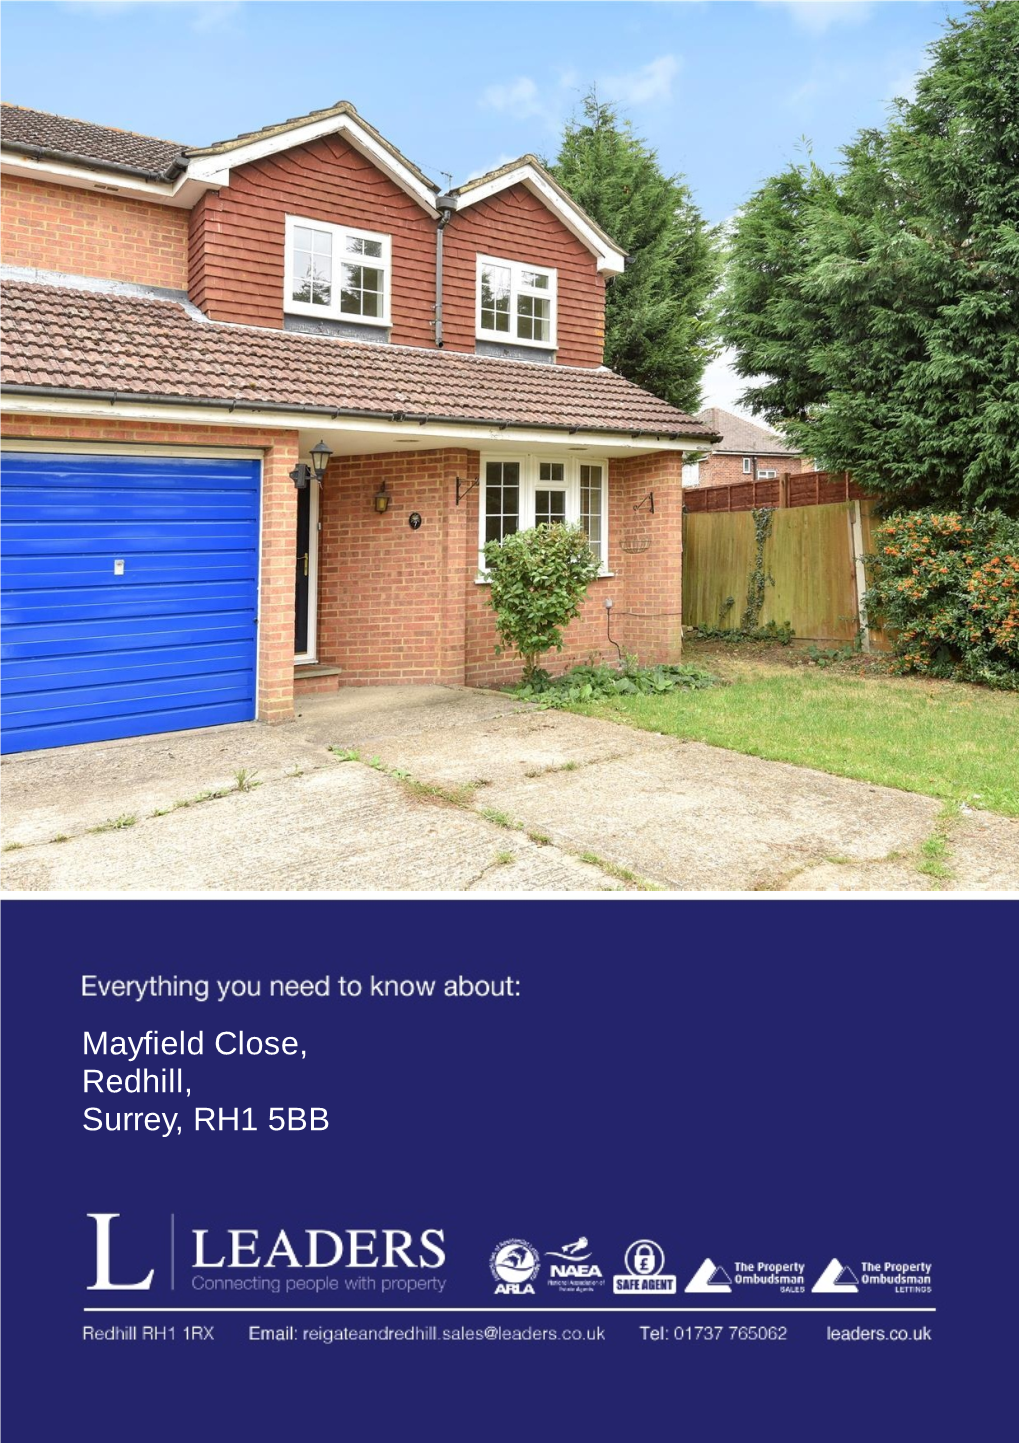 Mayfield Close, Redhill, Surrey, RH1 5BB LOCATION Contents